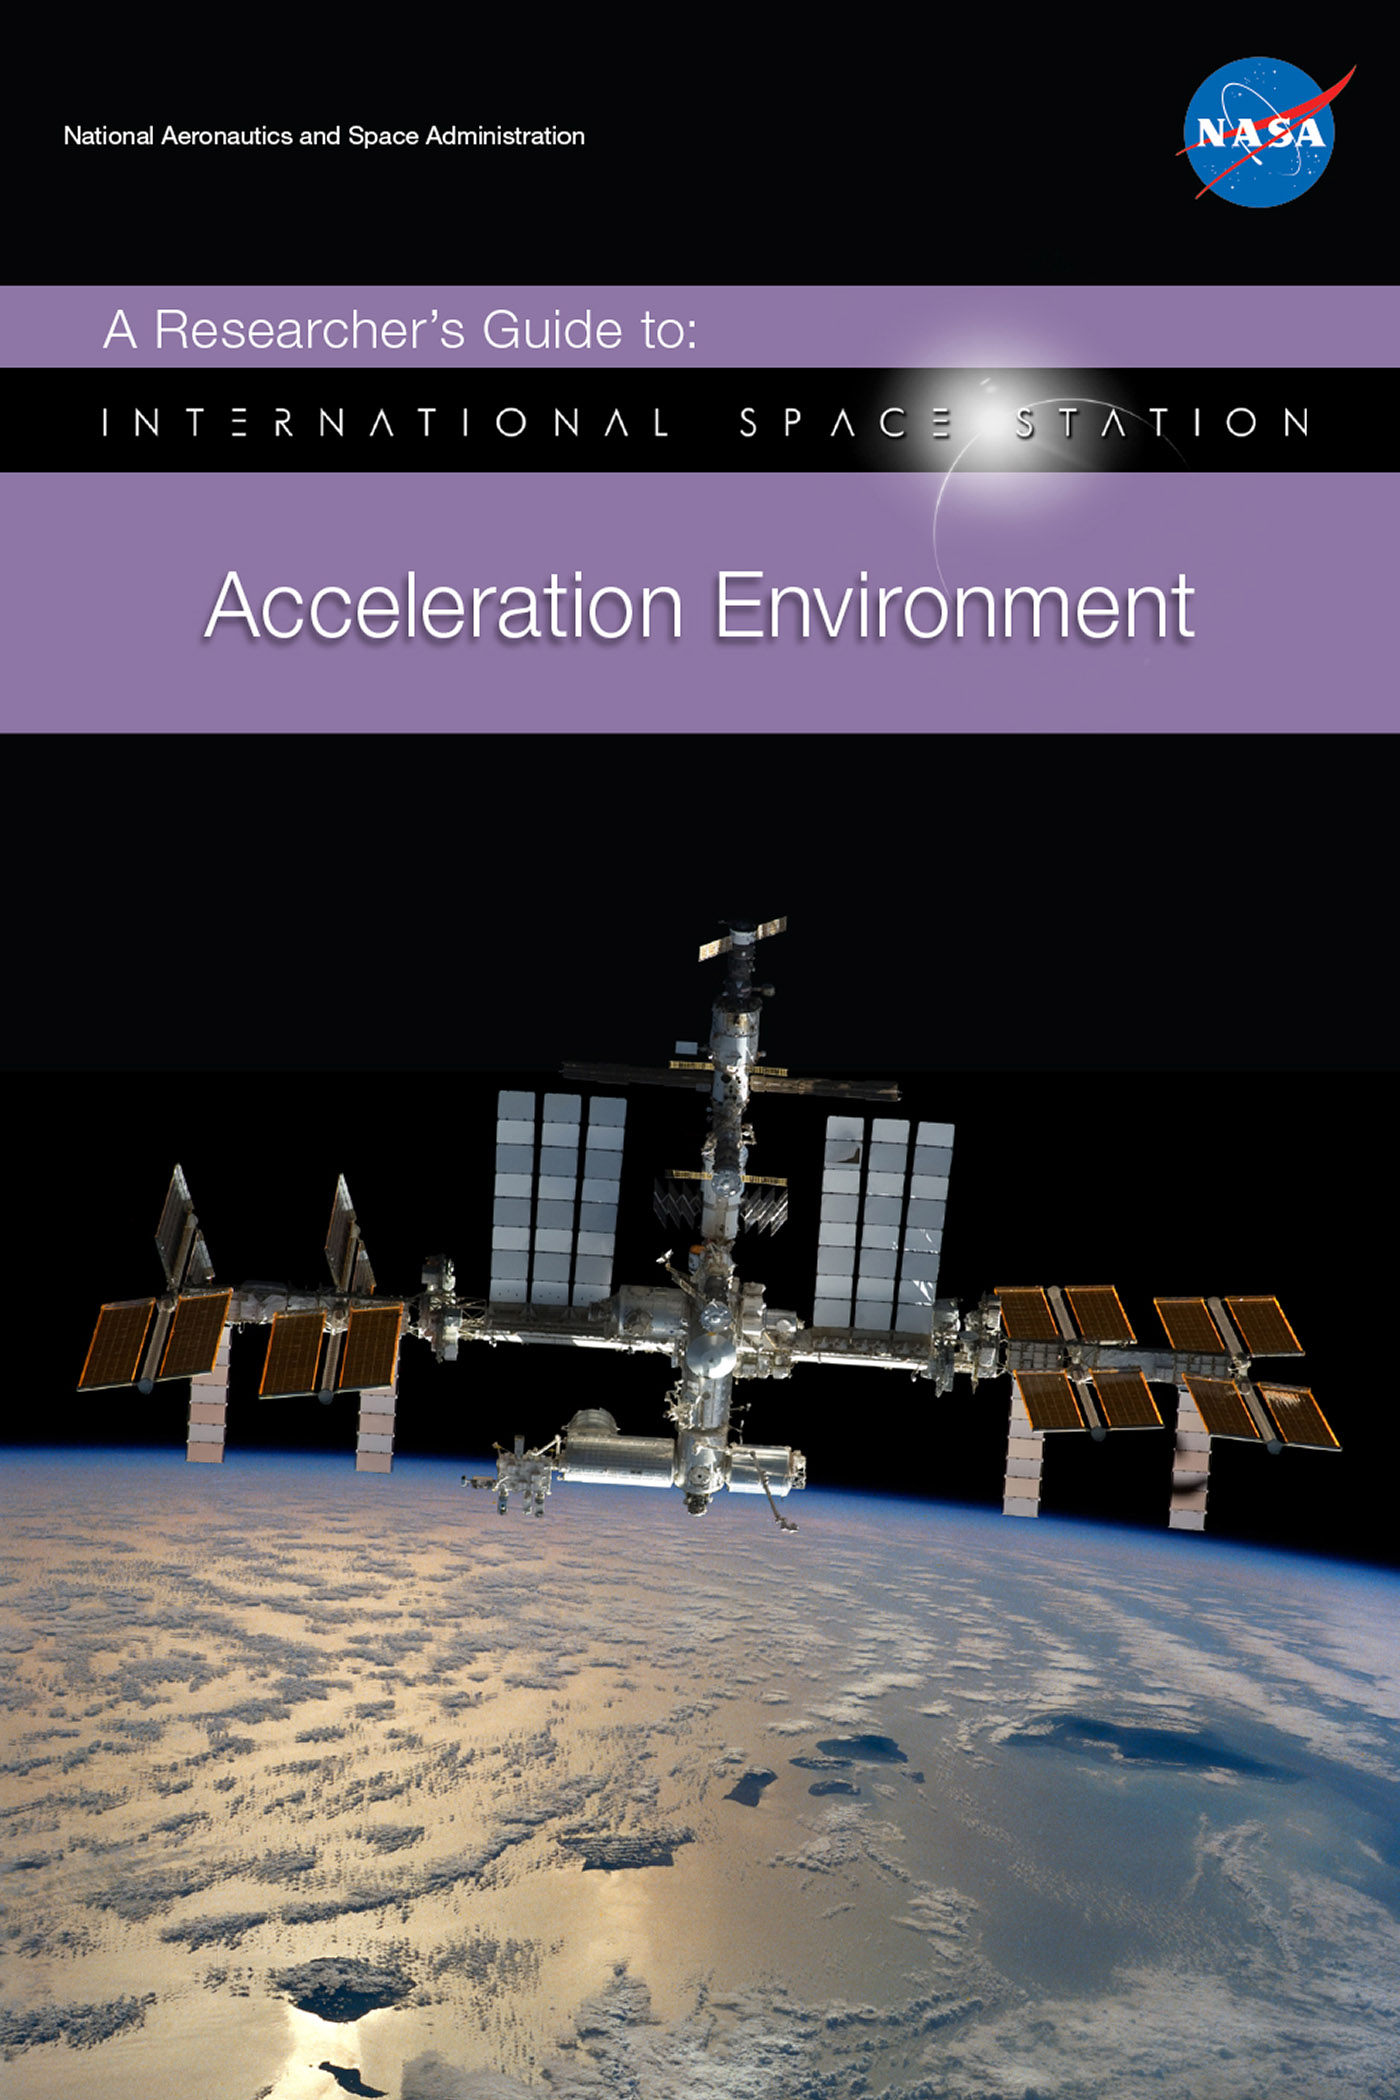 A Researcher's Guide to: Acceleration Environment